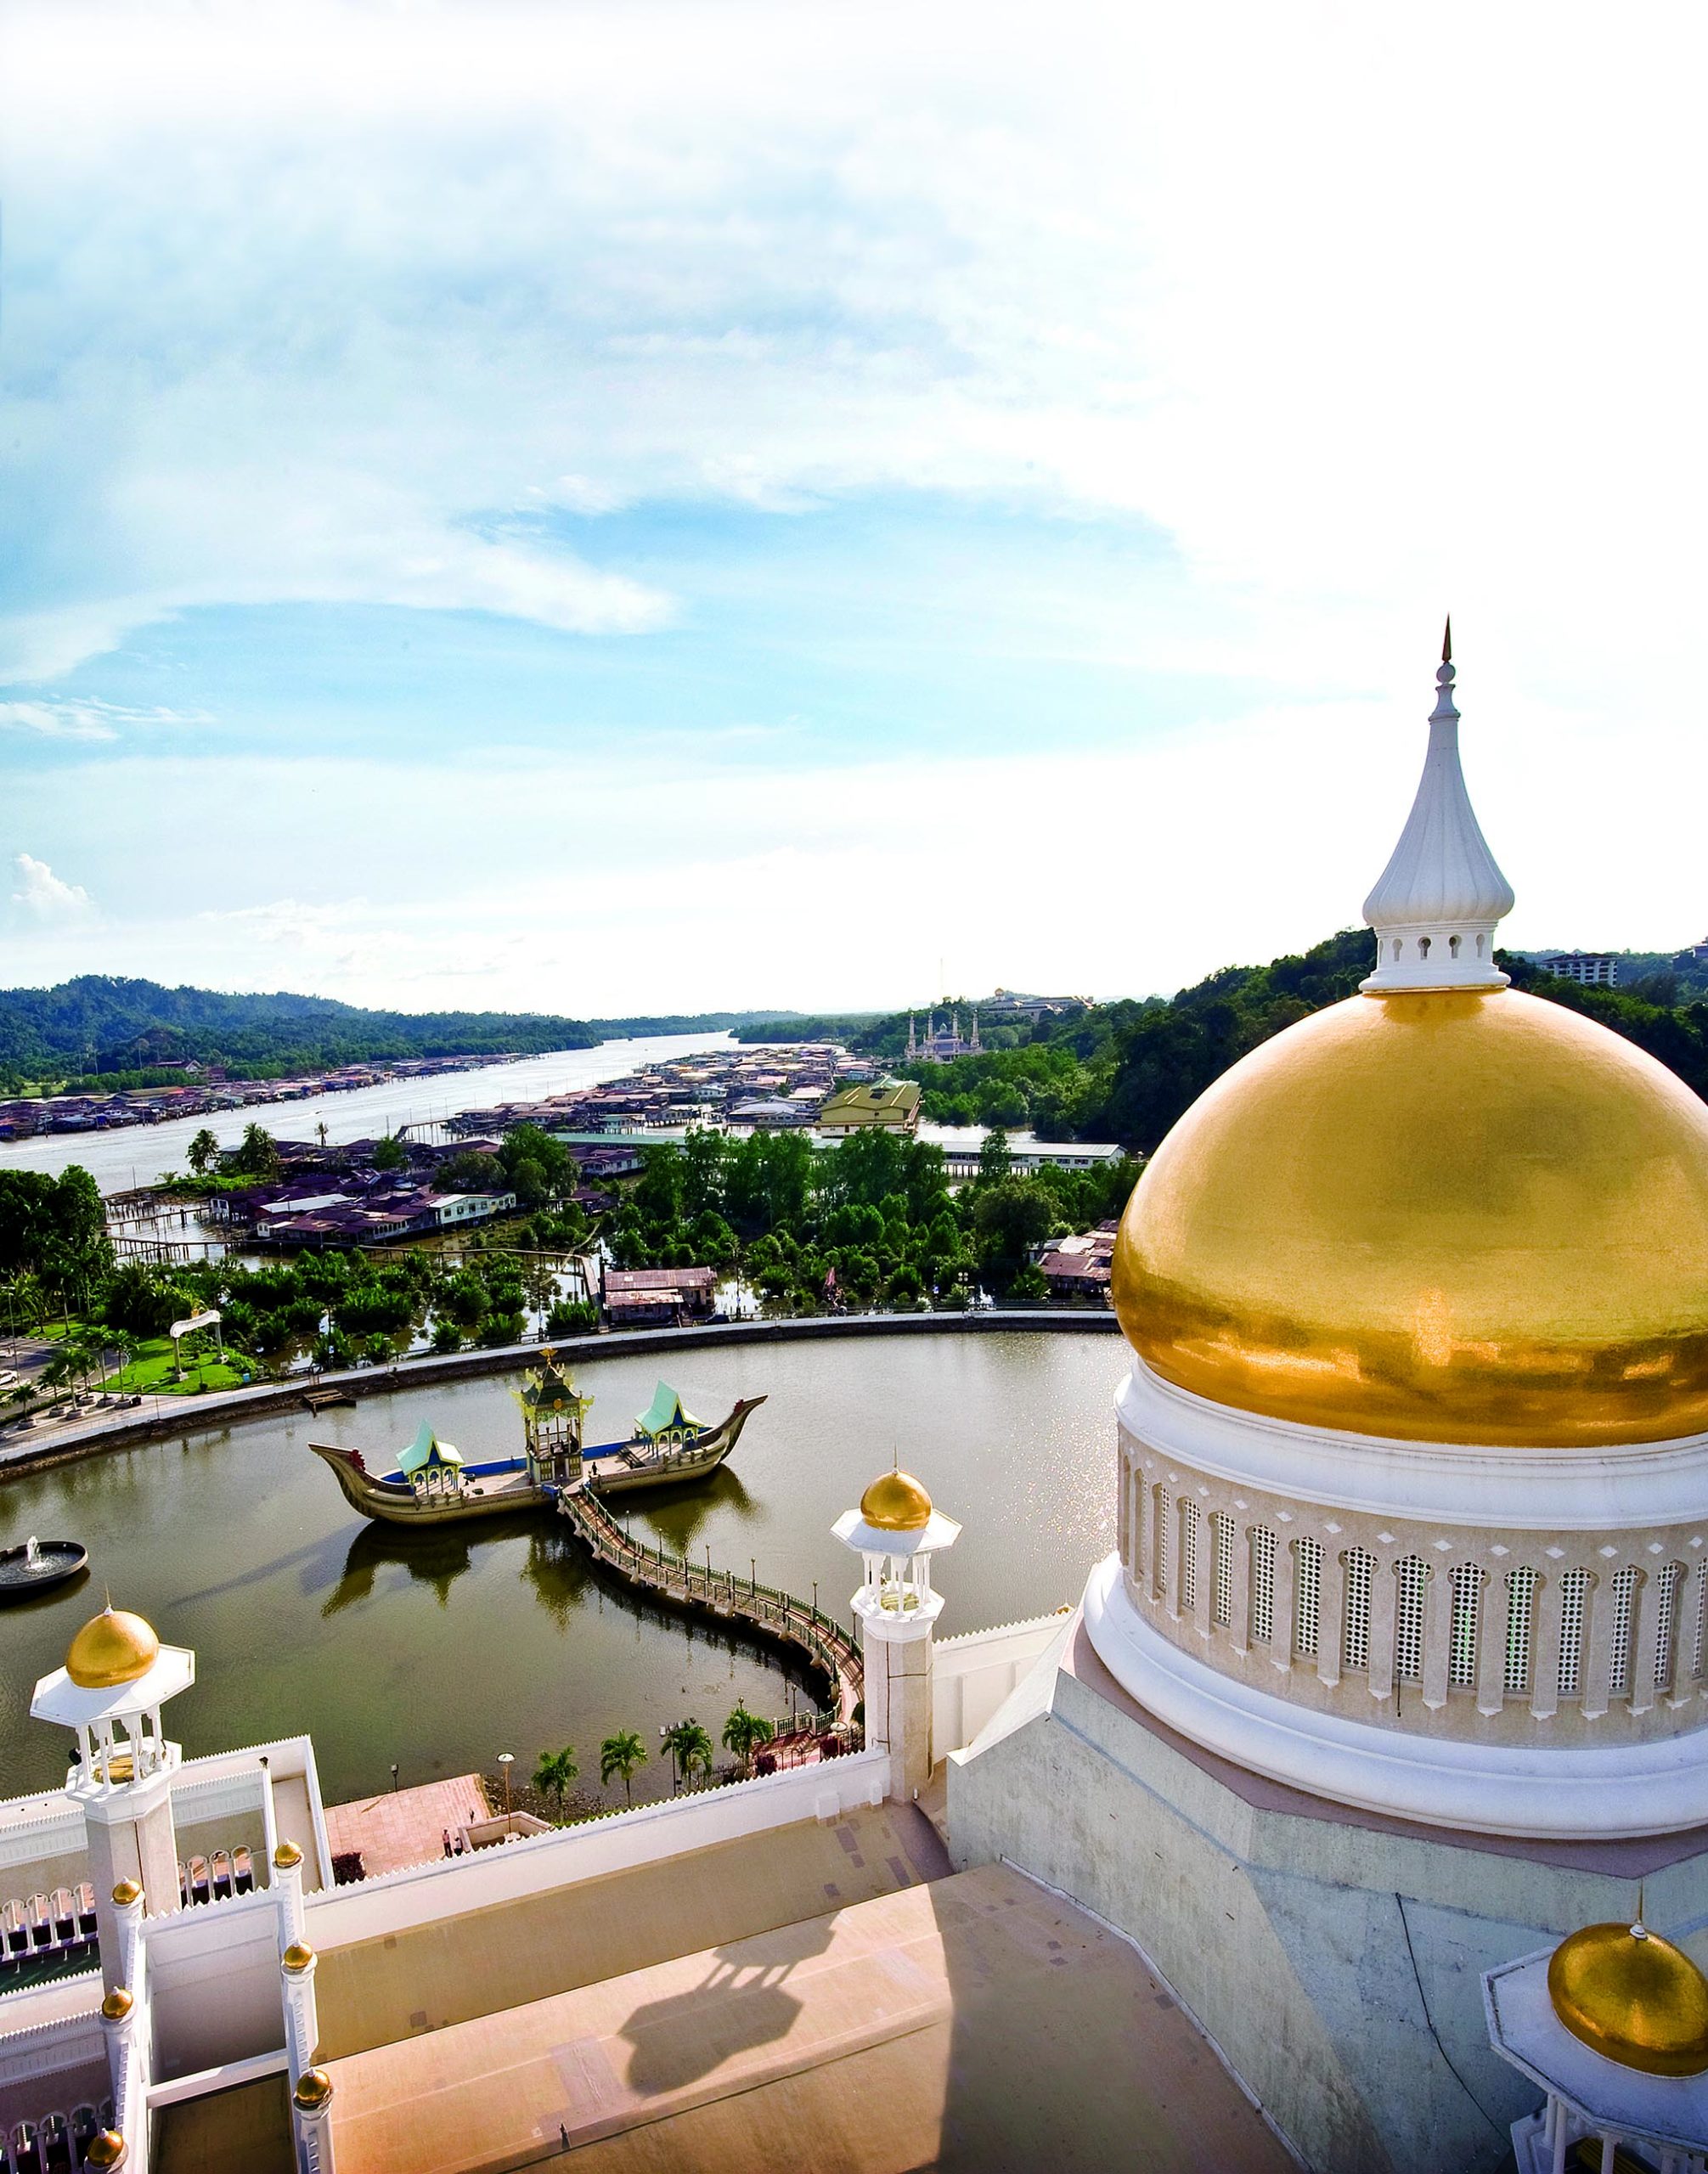 Full Brunei Experience - City Excursion with Water Village and Wildlife Safari